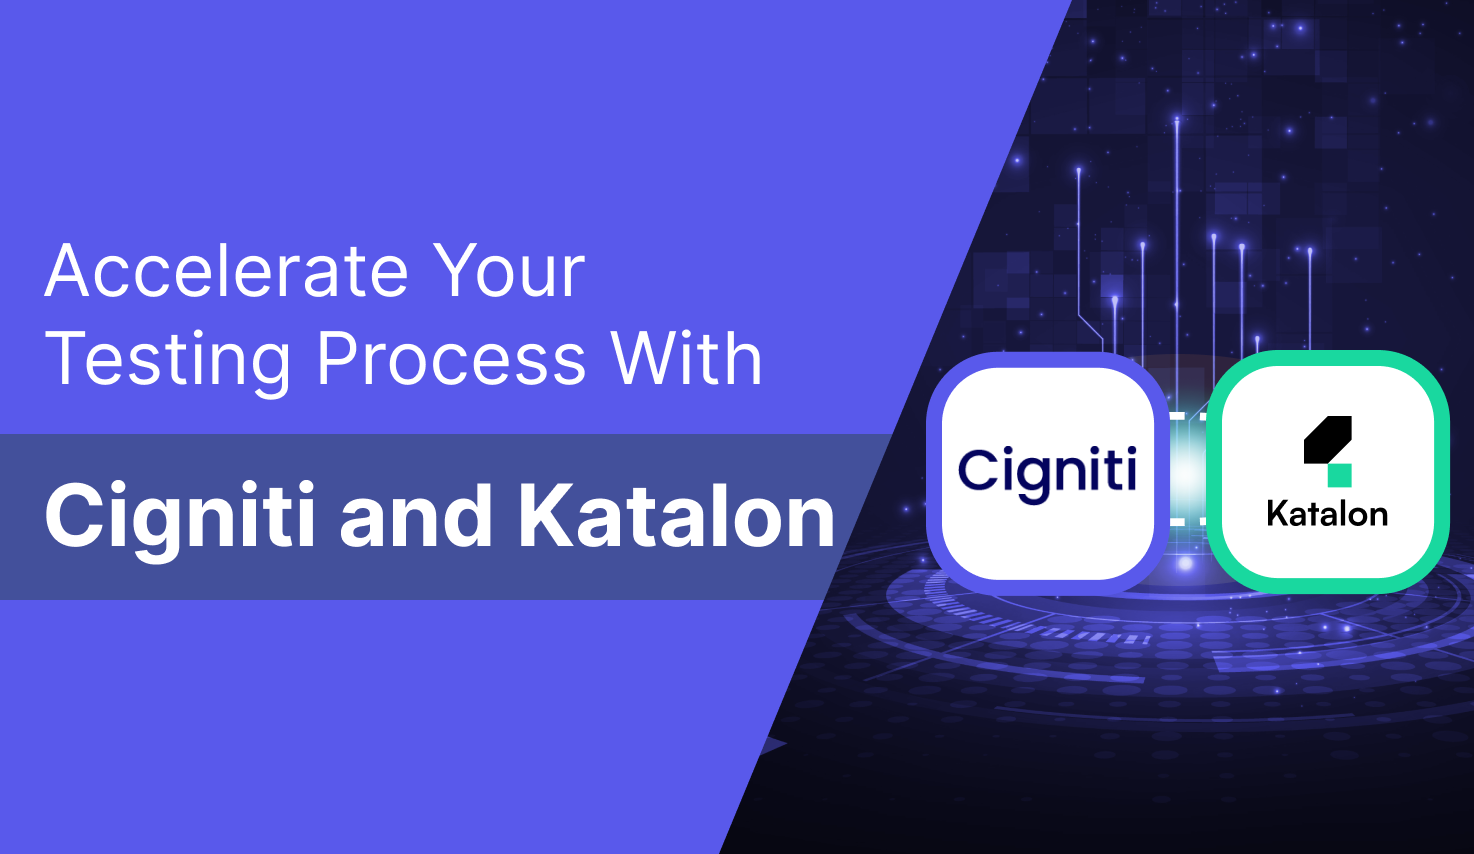 Accelerate Your Testing Process With Cigniti and Katalon